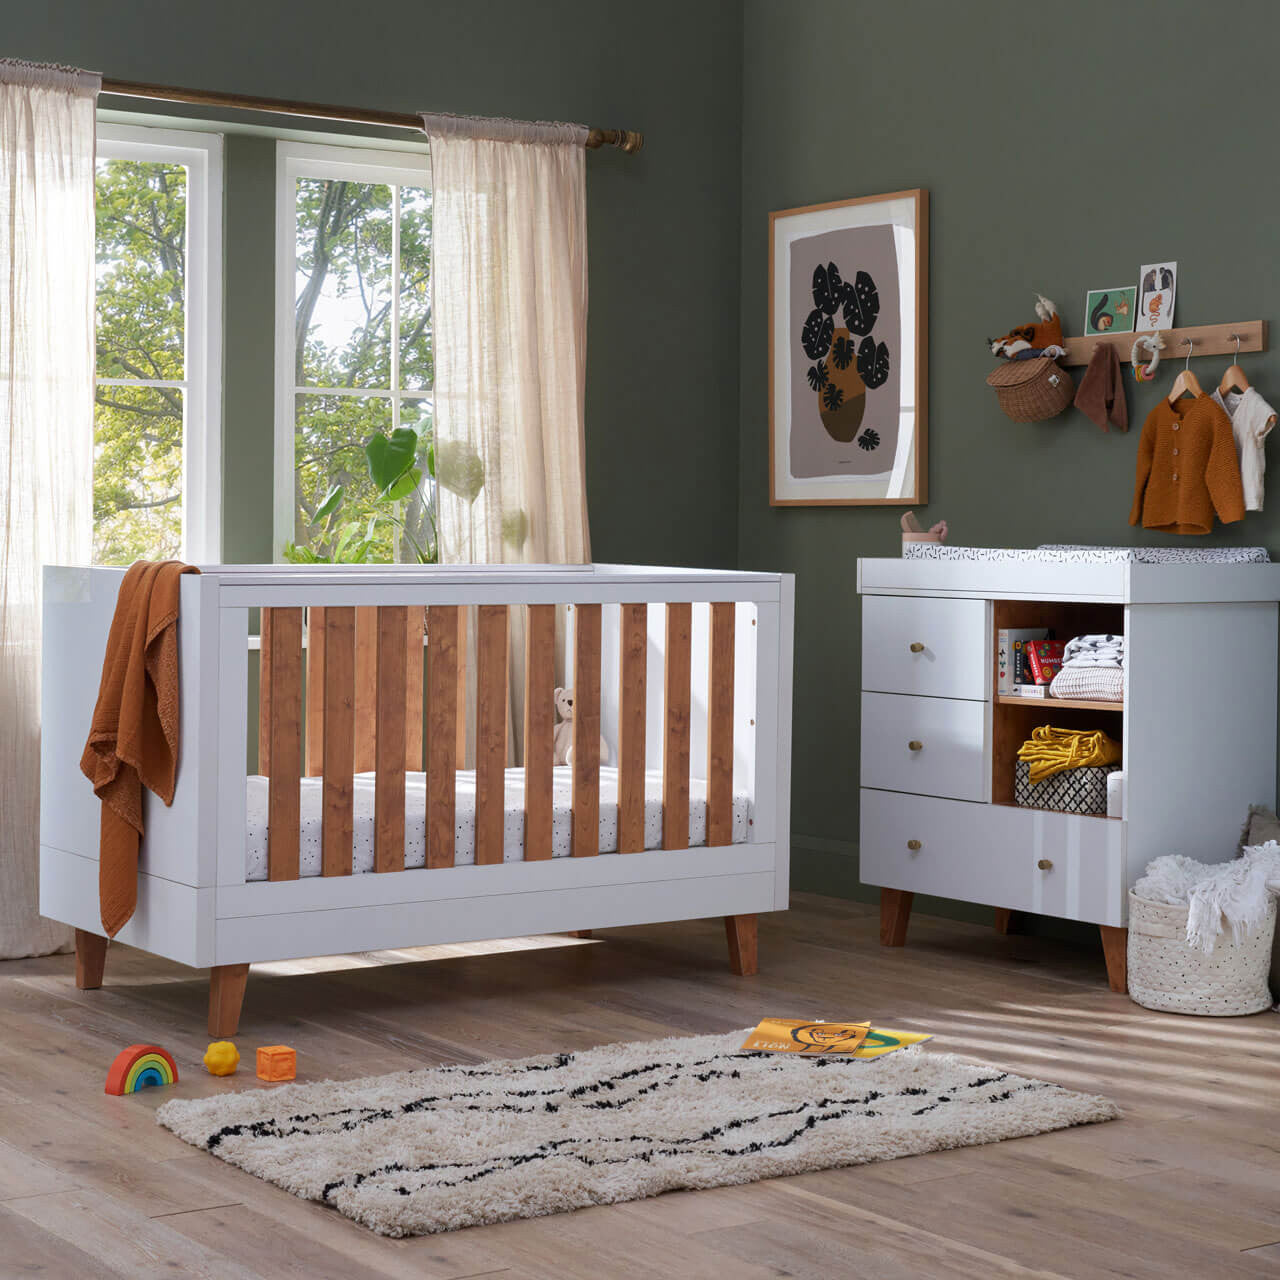 Tutti Bambini Como 2 Piece Room Set - White / Rosewood - For Your Little One